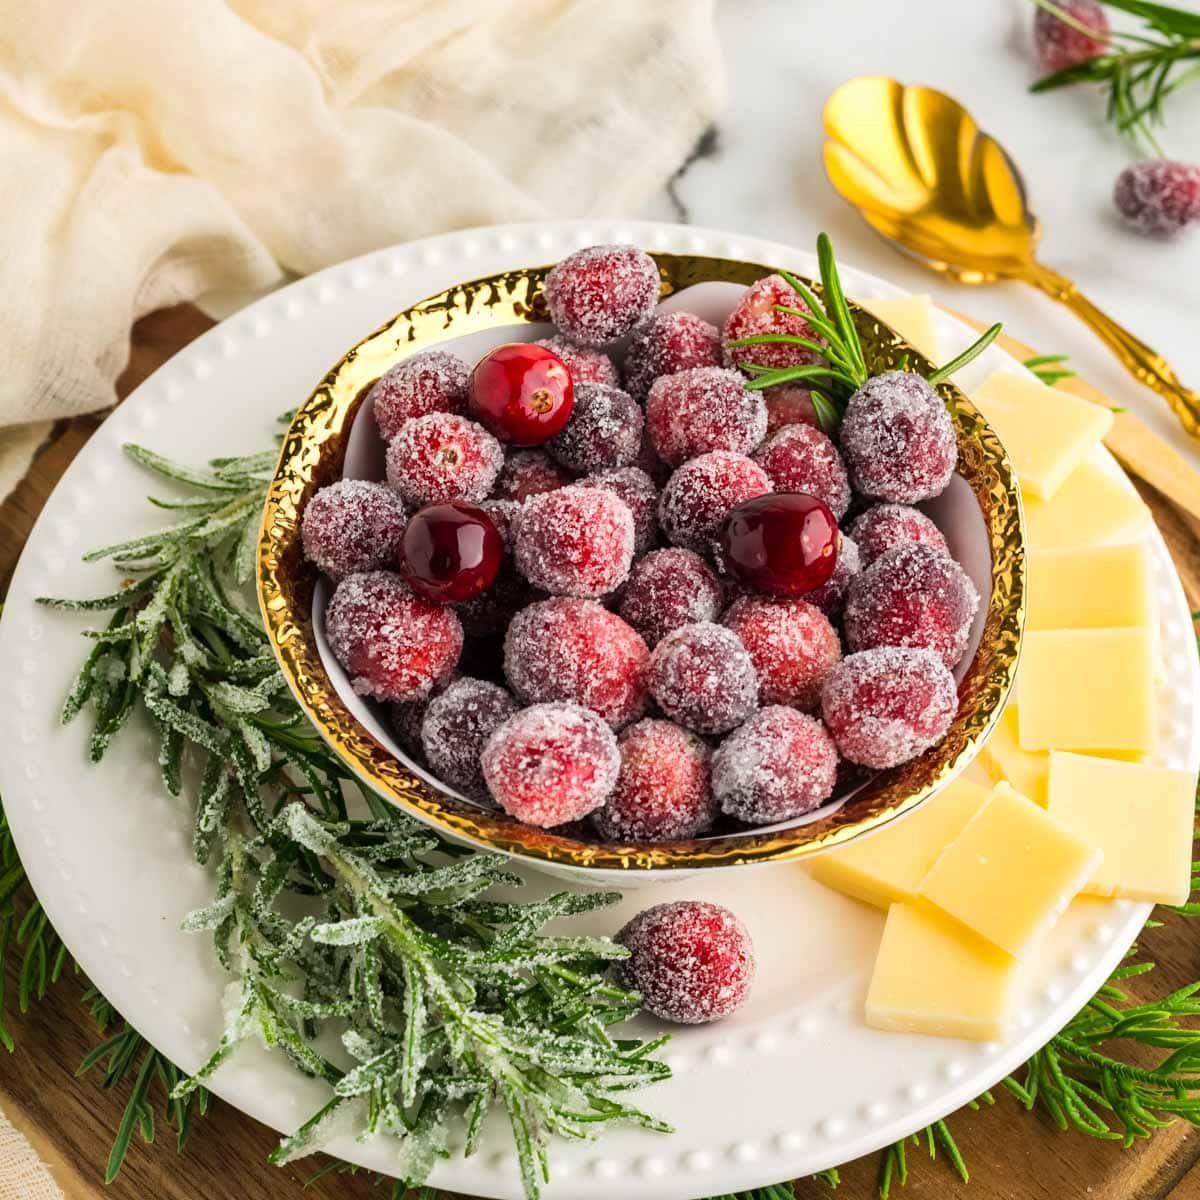 Homemade sugared cranberries served in a gold rimmed bowl with sliced white cheddar cheese and garnished with sugared rosemary.